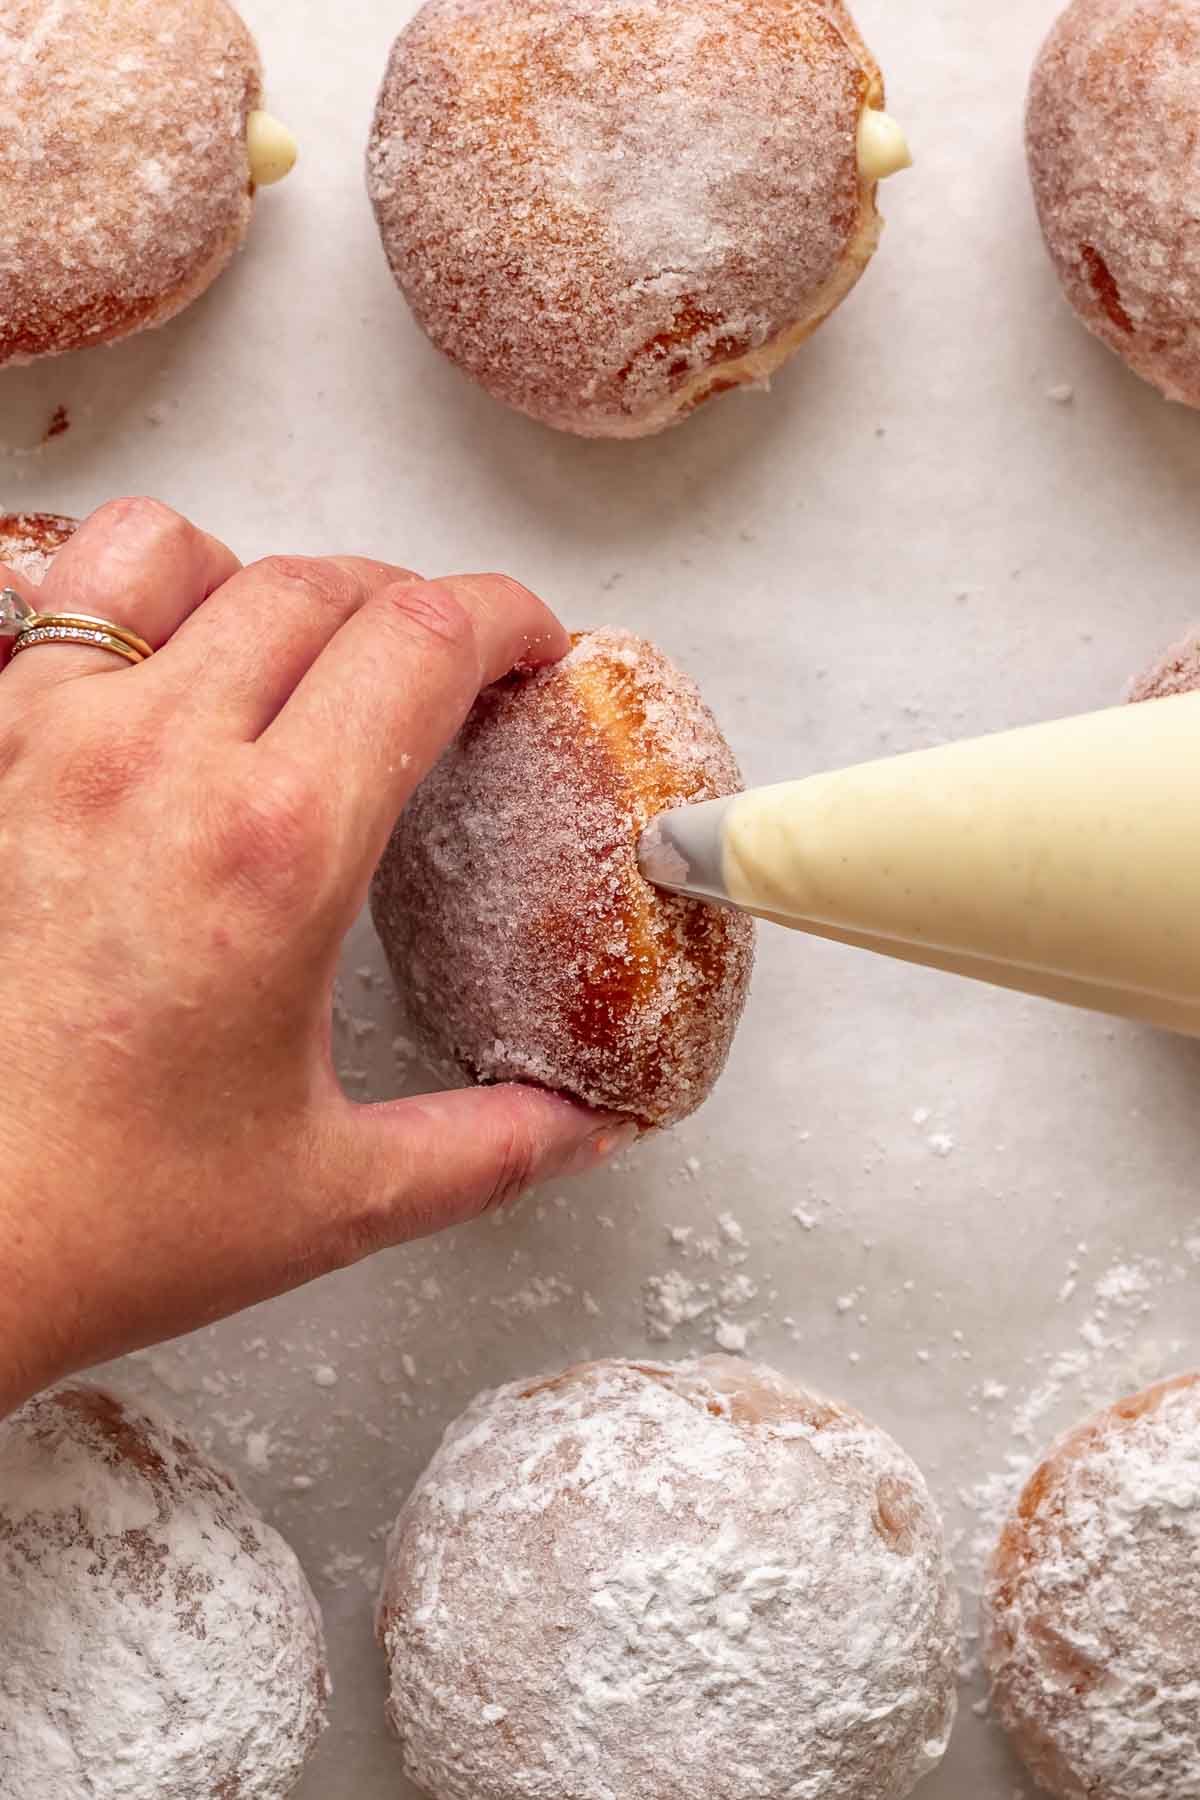 A hand pipes pastry cream into a fried brioche donut.